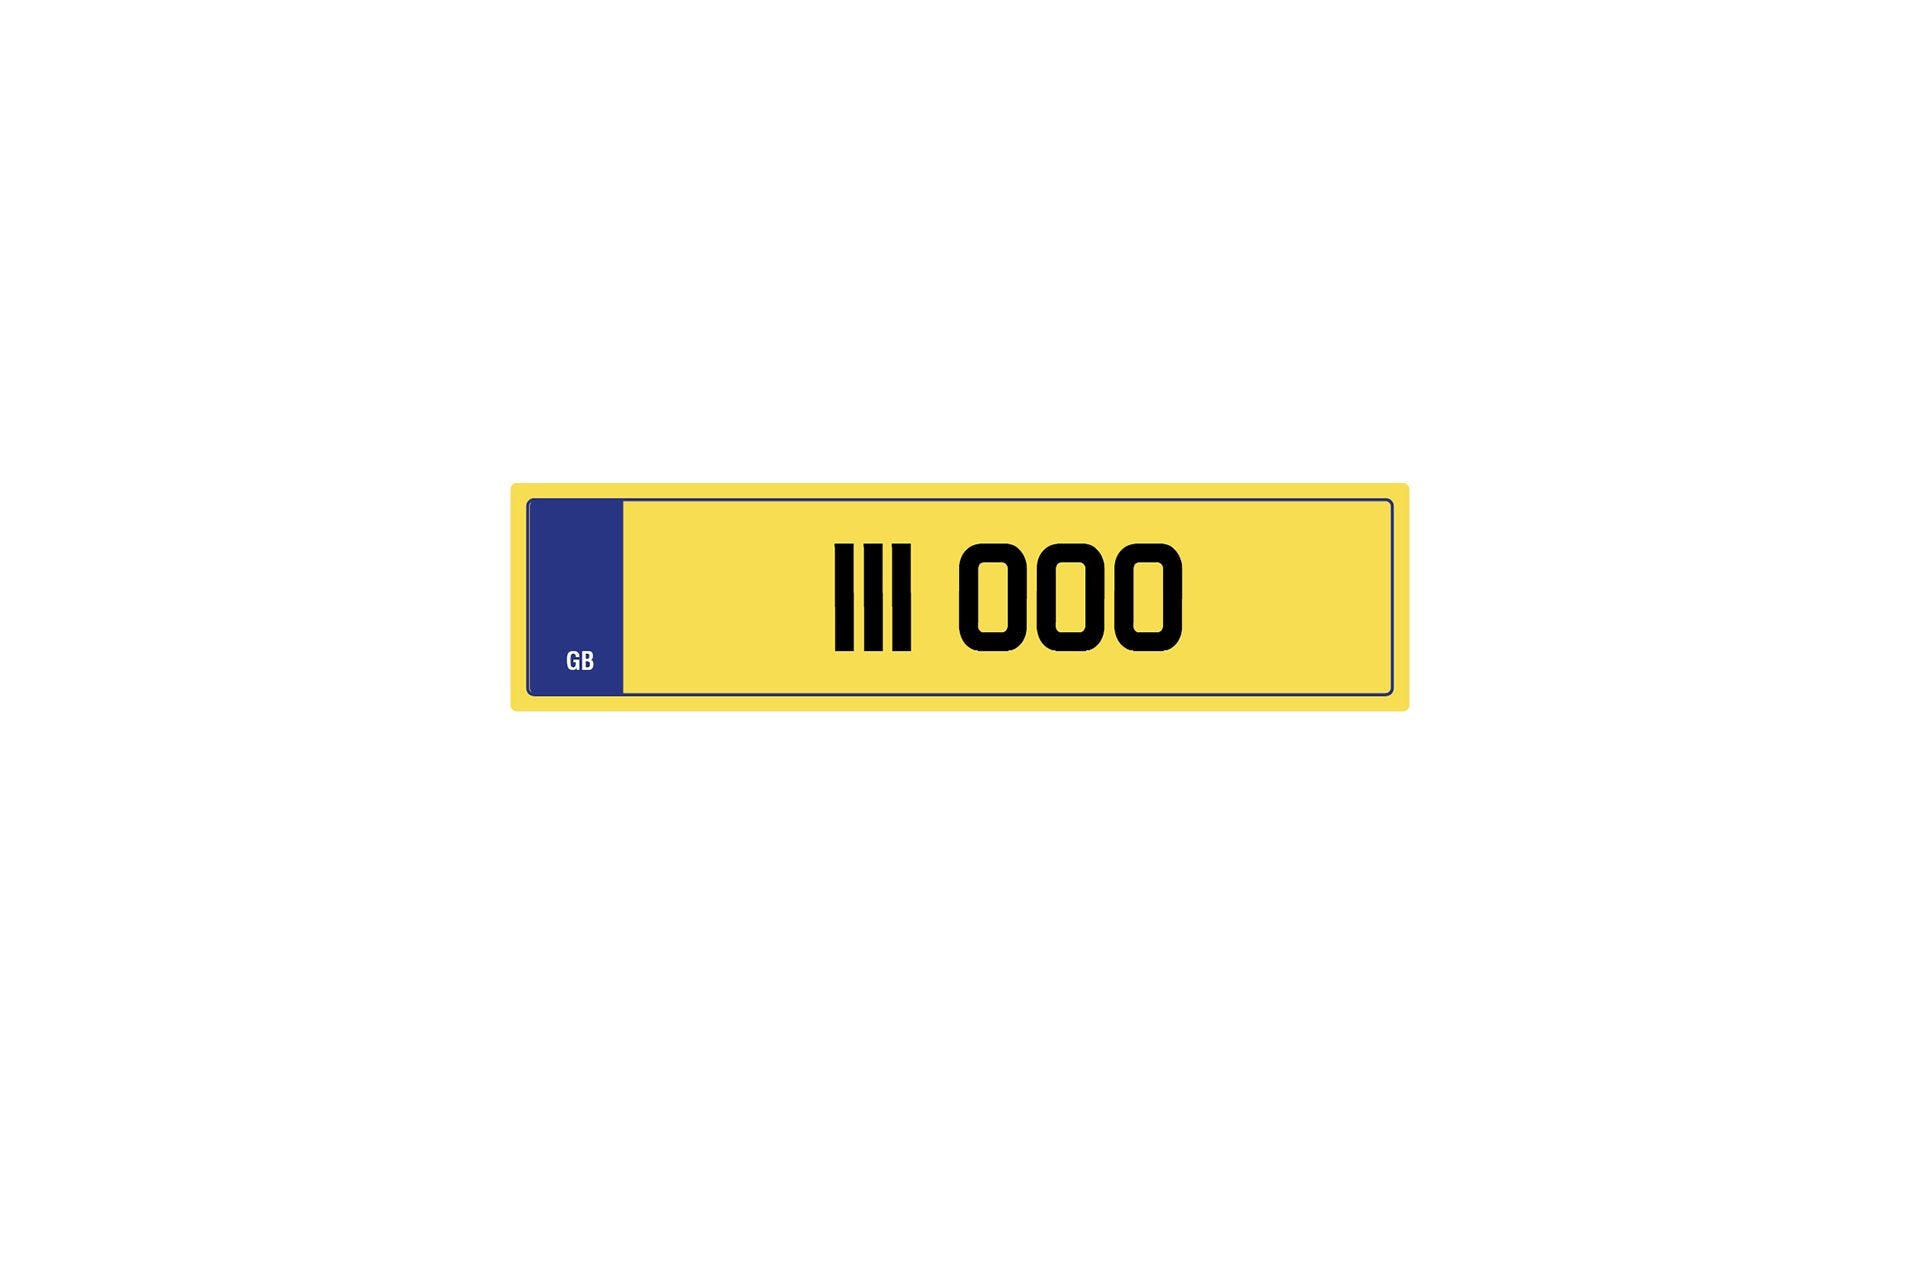 Private Plate 111 000 by Kahn - Image 267